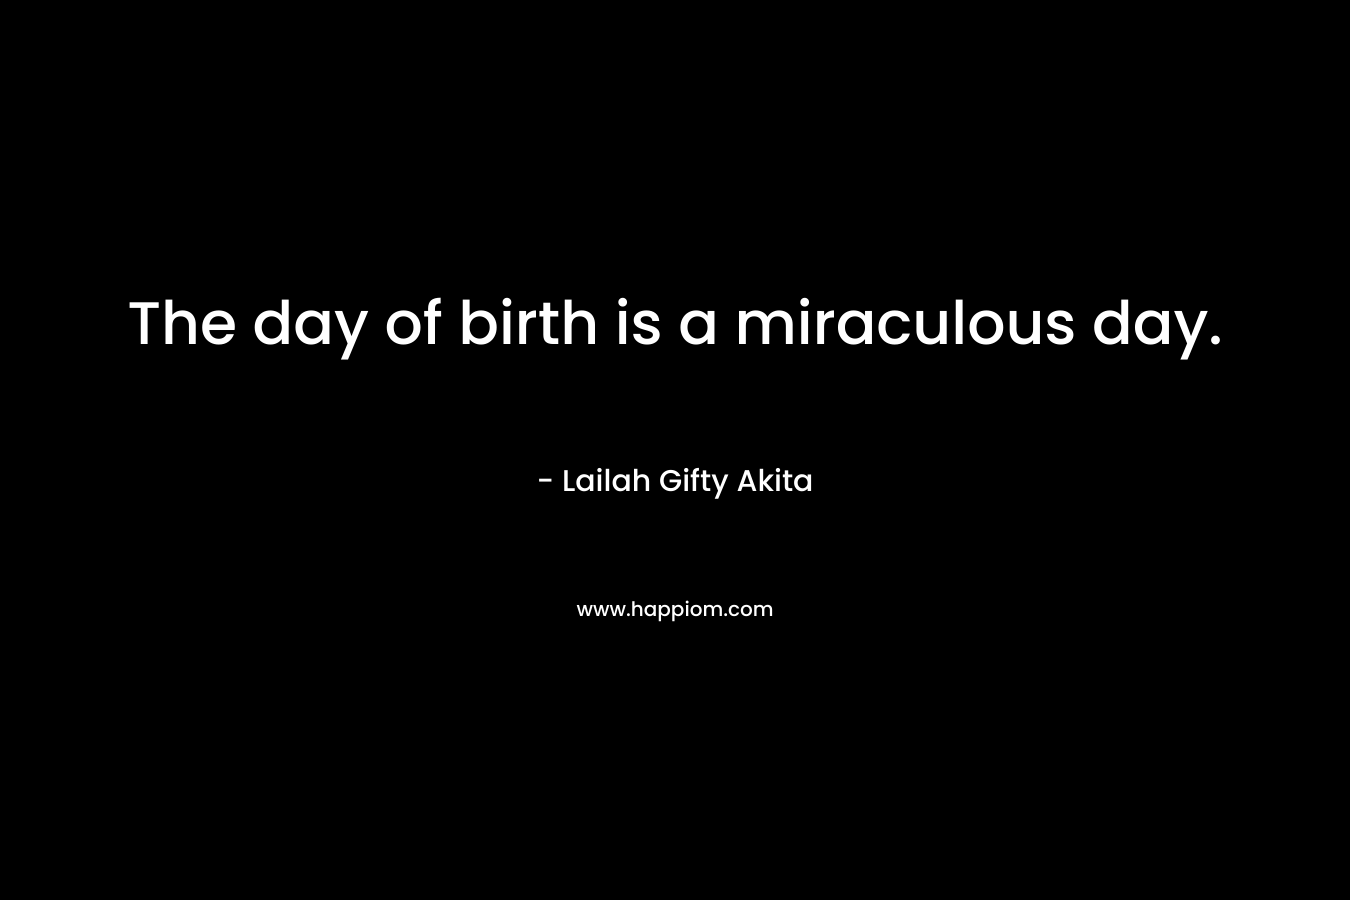 The day of birth is a miraculous day.